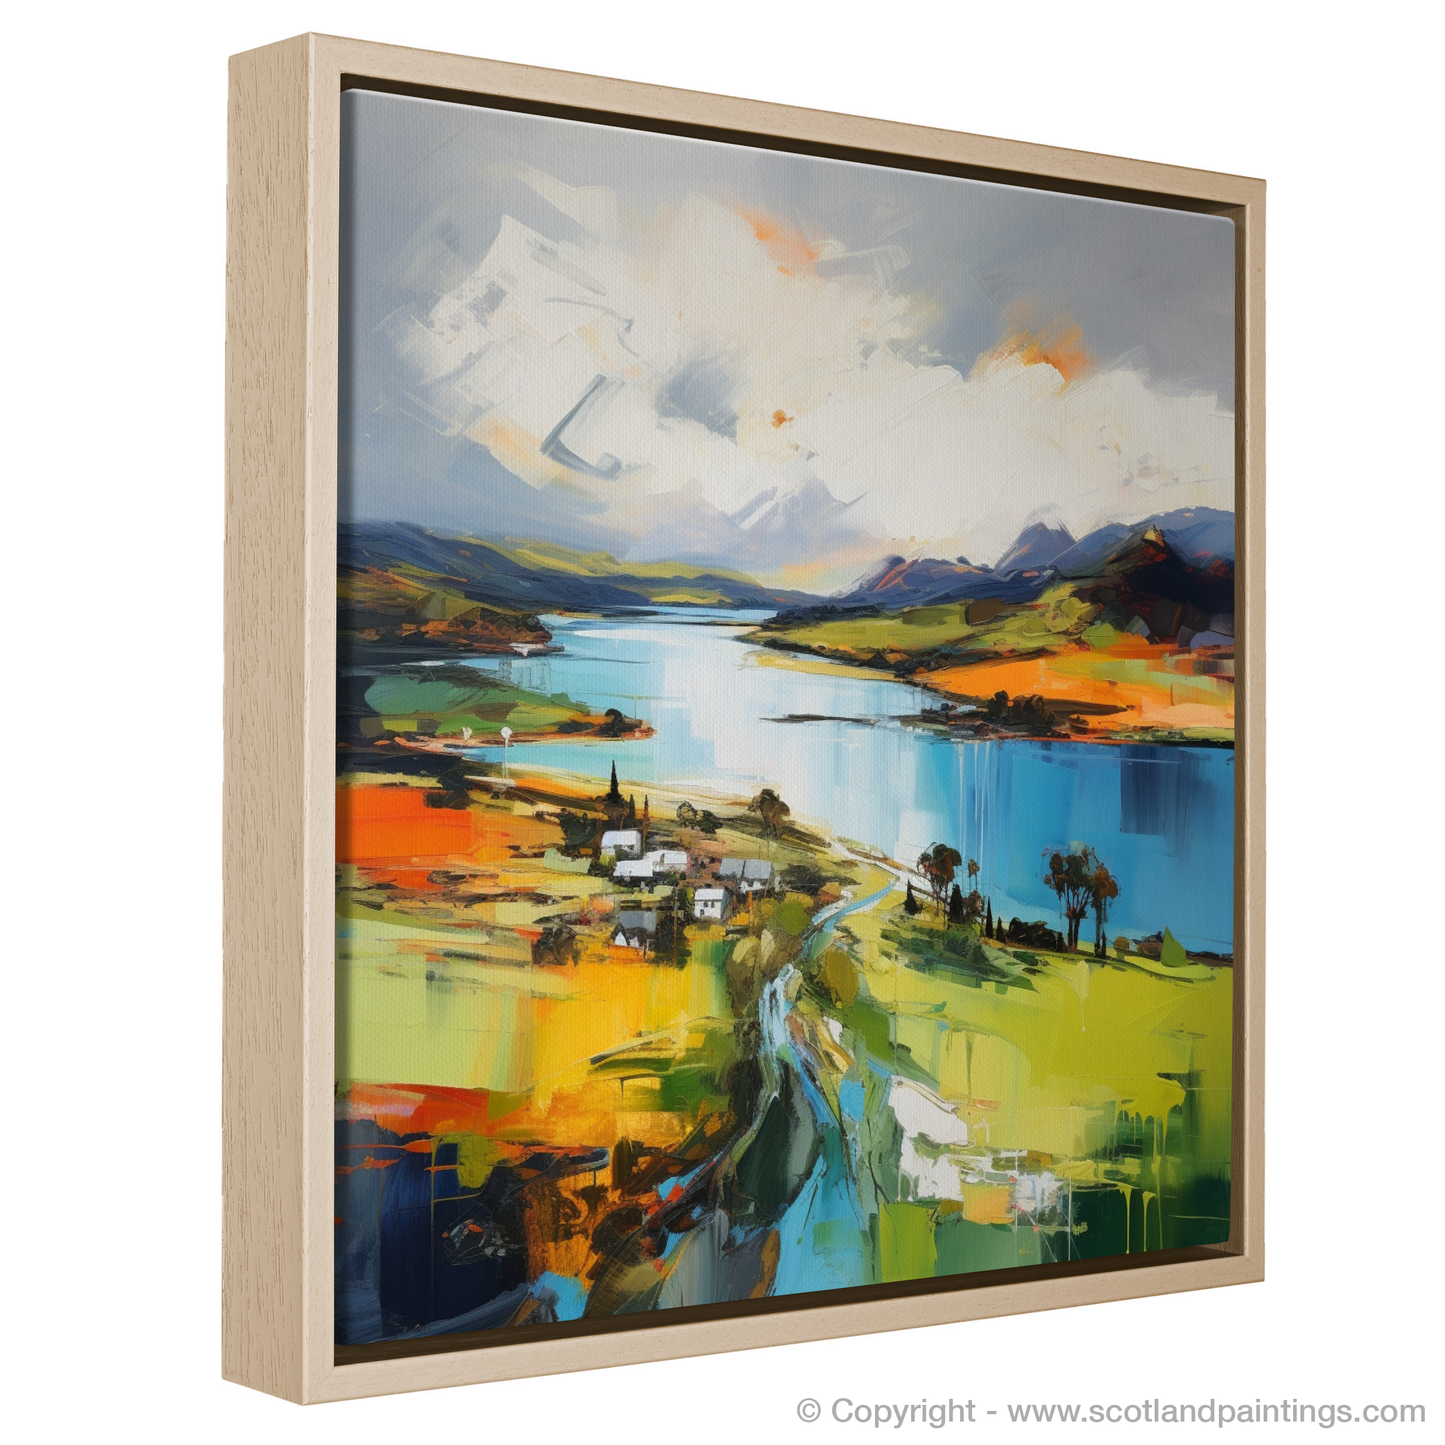 Painting and Art Print of Loch Leven, Perth and Kinross entitled "Loch Leven Rhapsody in Expressionist Hues".